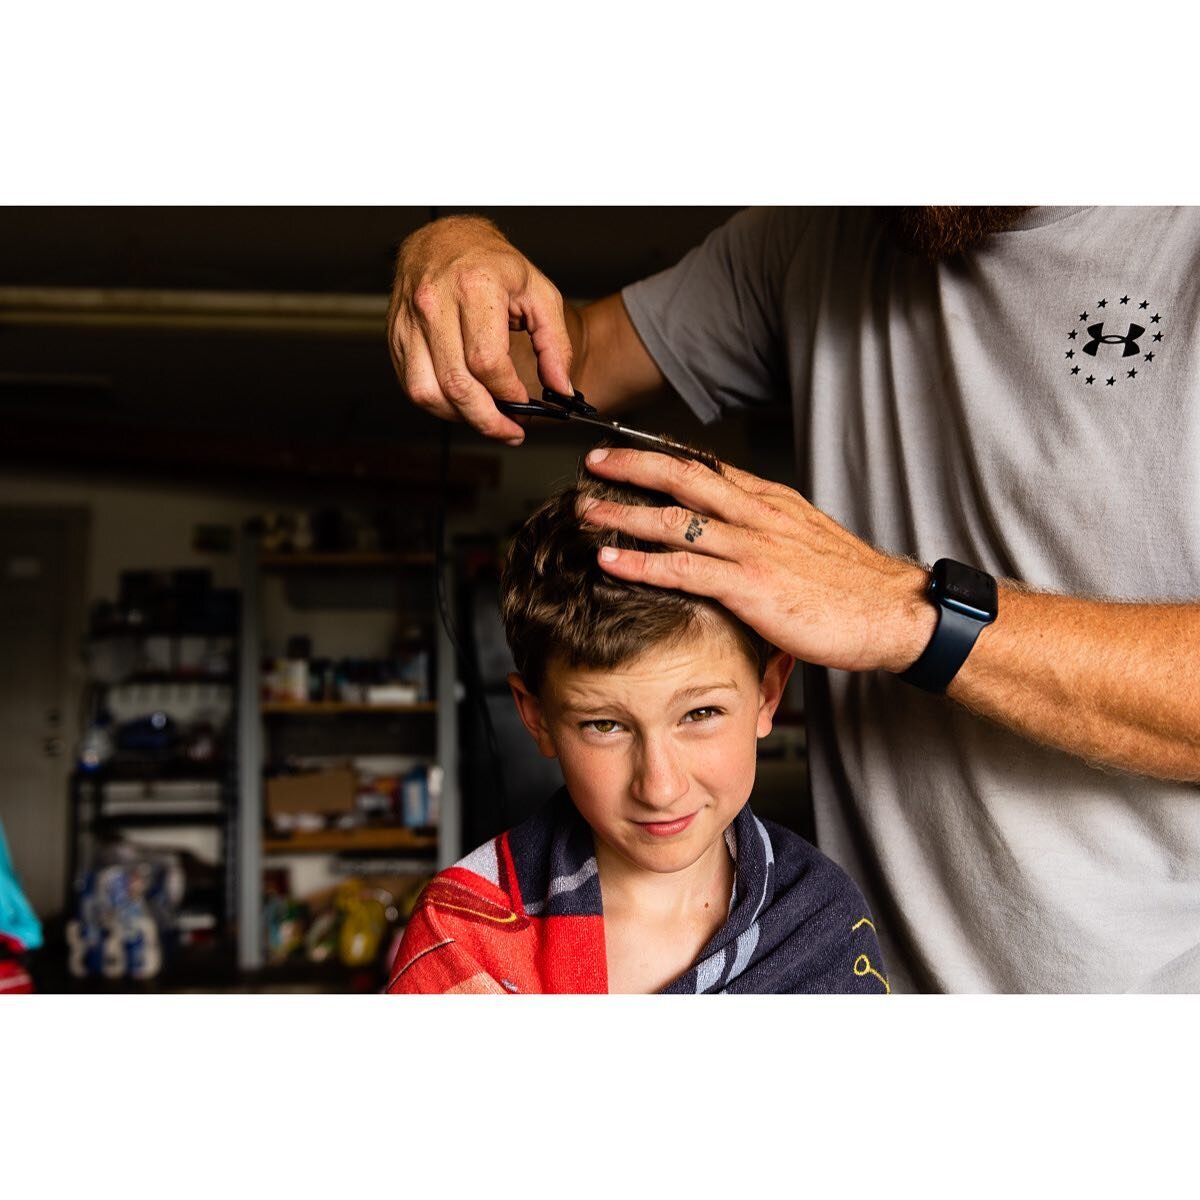 One of the many acquired skills from 2020&hellip; garage haircuts.